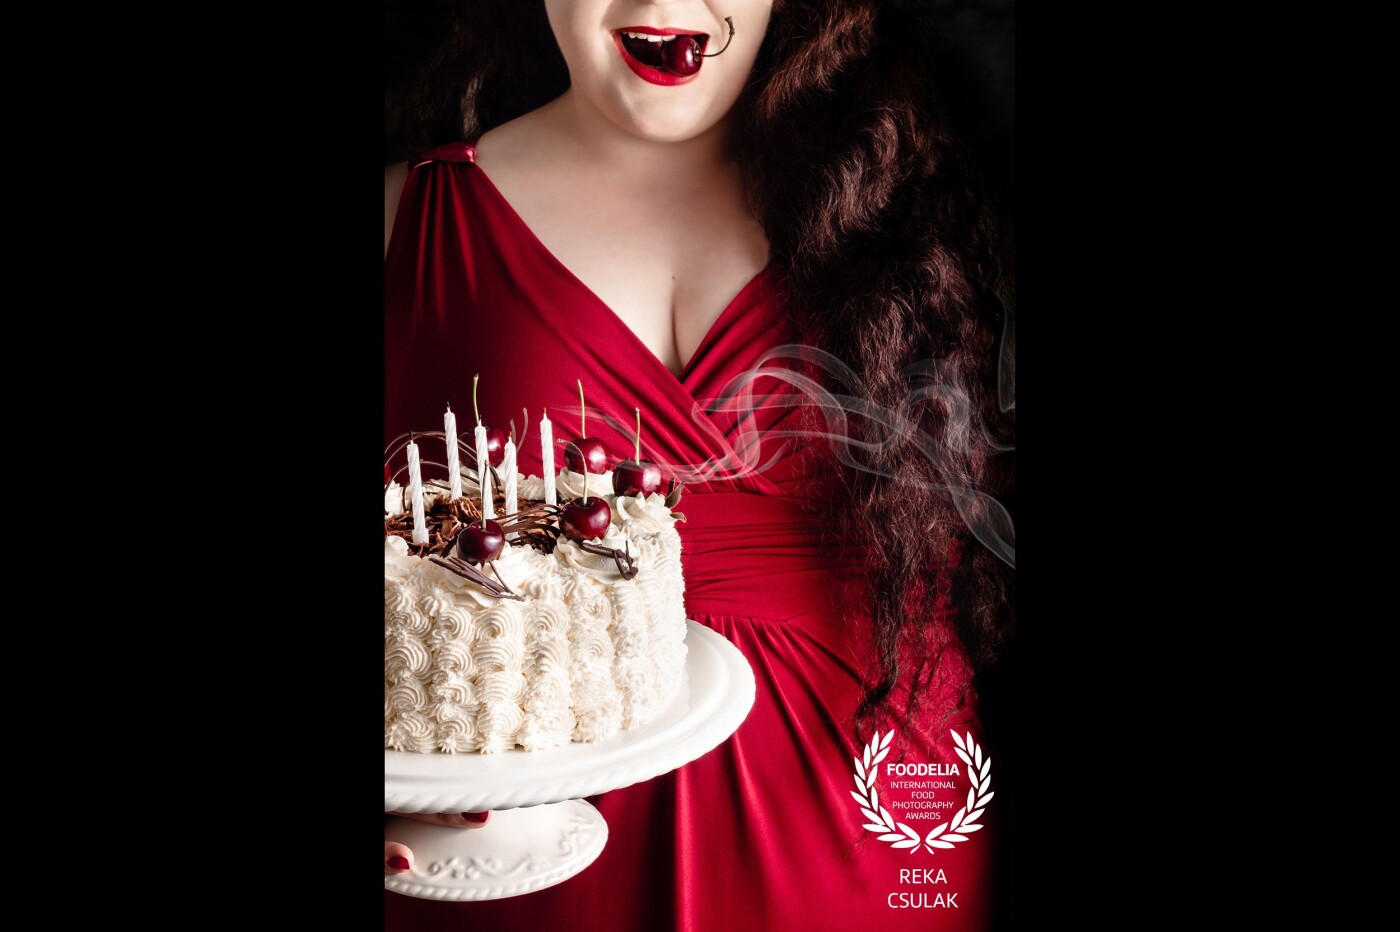 This capture is a playful self-portrait that pays tribute to the photographer's twenties on her birthday around Midsummer. Monochromatic, so it goes well to her style and full-on red as the cherry season was at its highest peak.